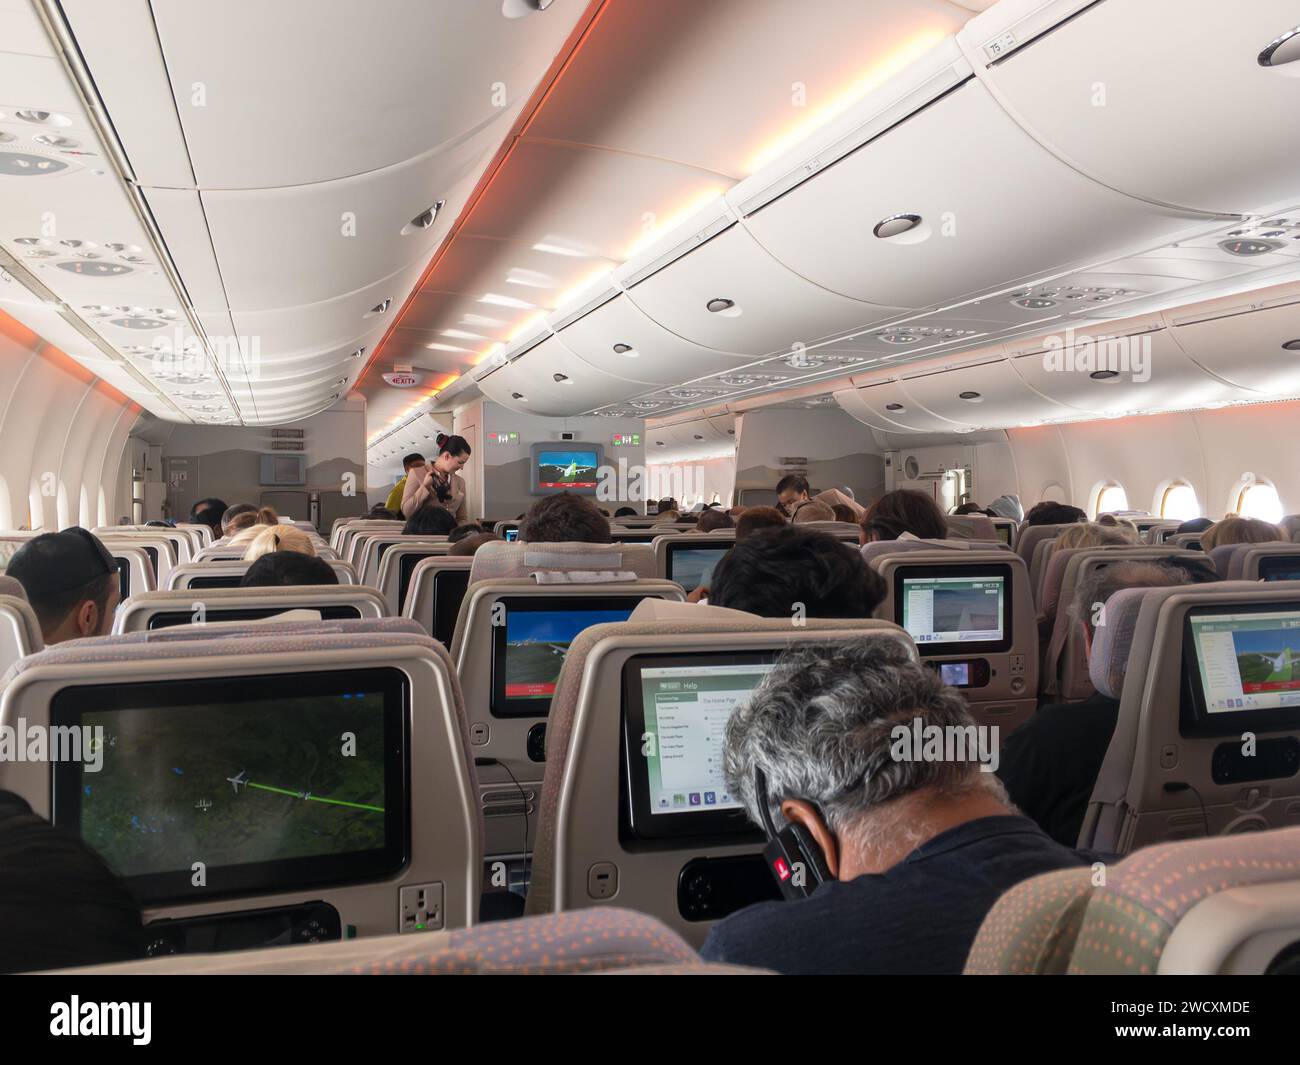 PERTH, AUSTRALIA - JULY 17, 2018: Interior of Emirates airlines aircraft on long haul flight, stewardess delivering  headphones Stock Photo